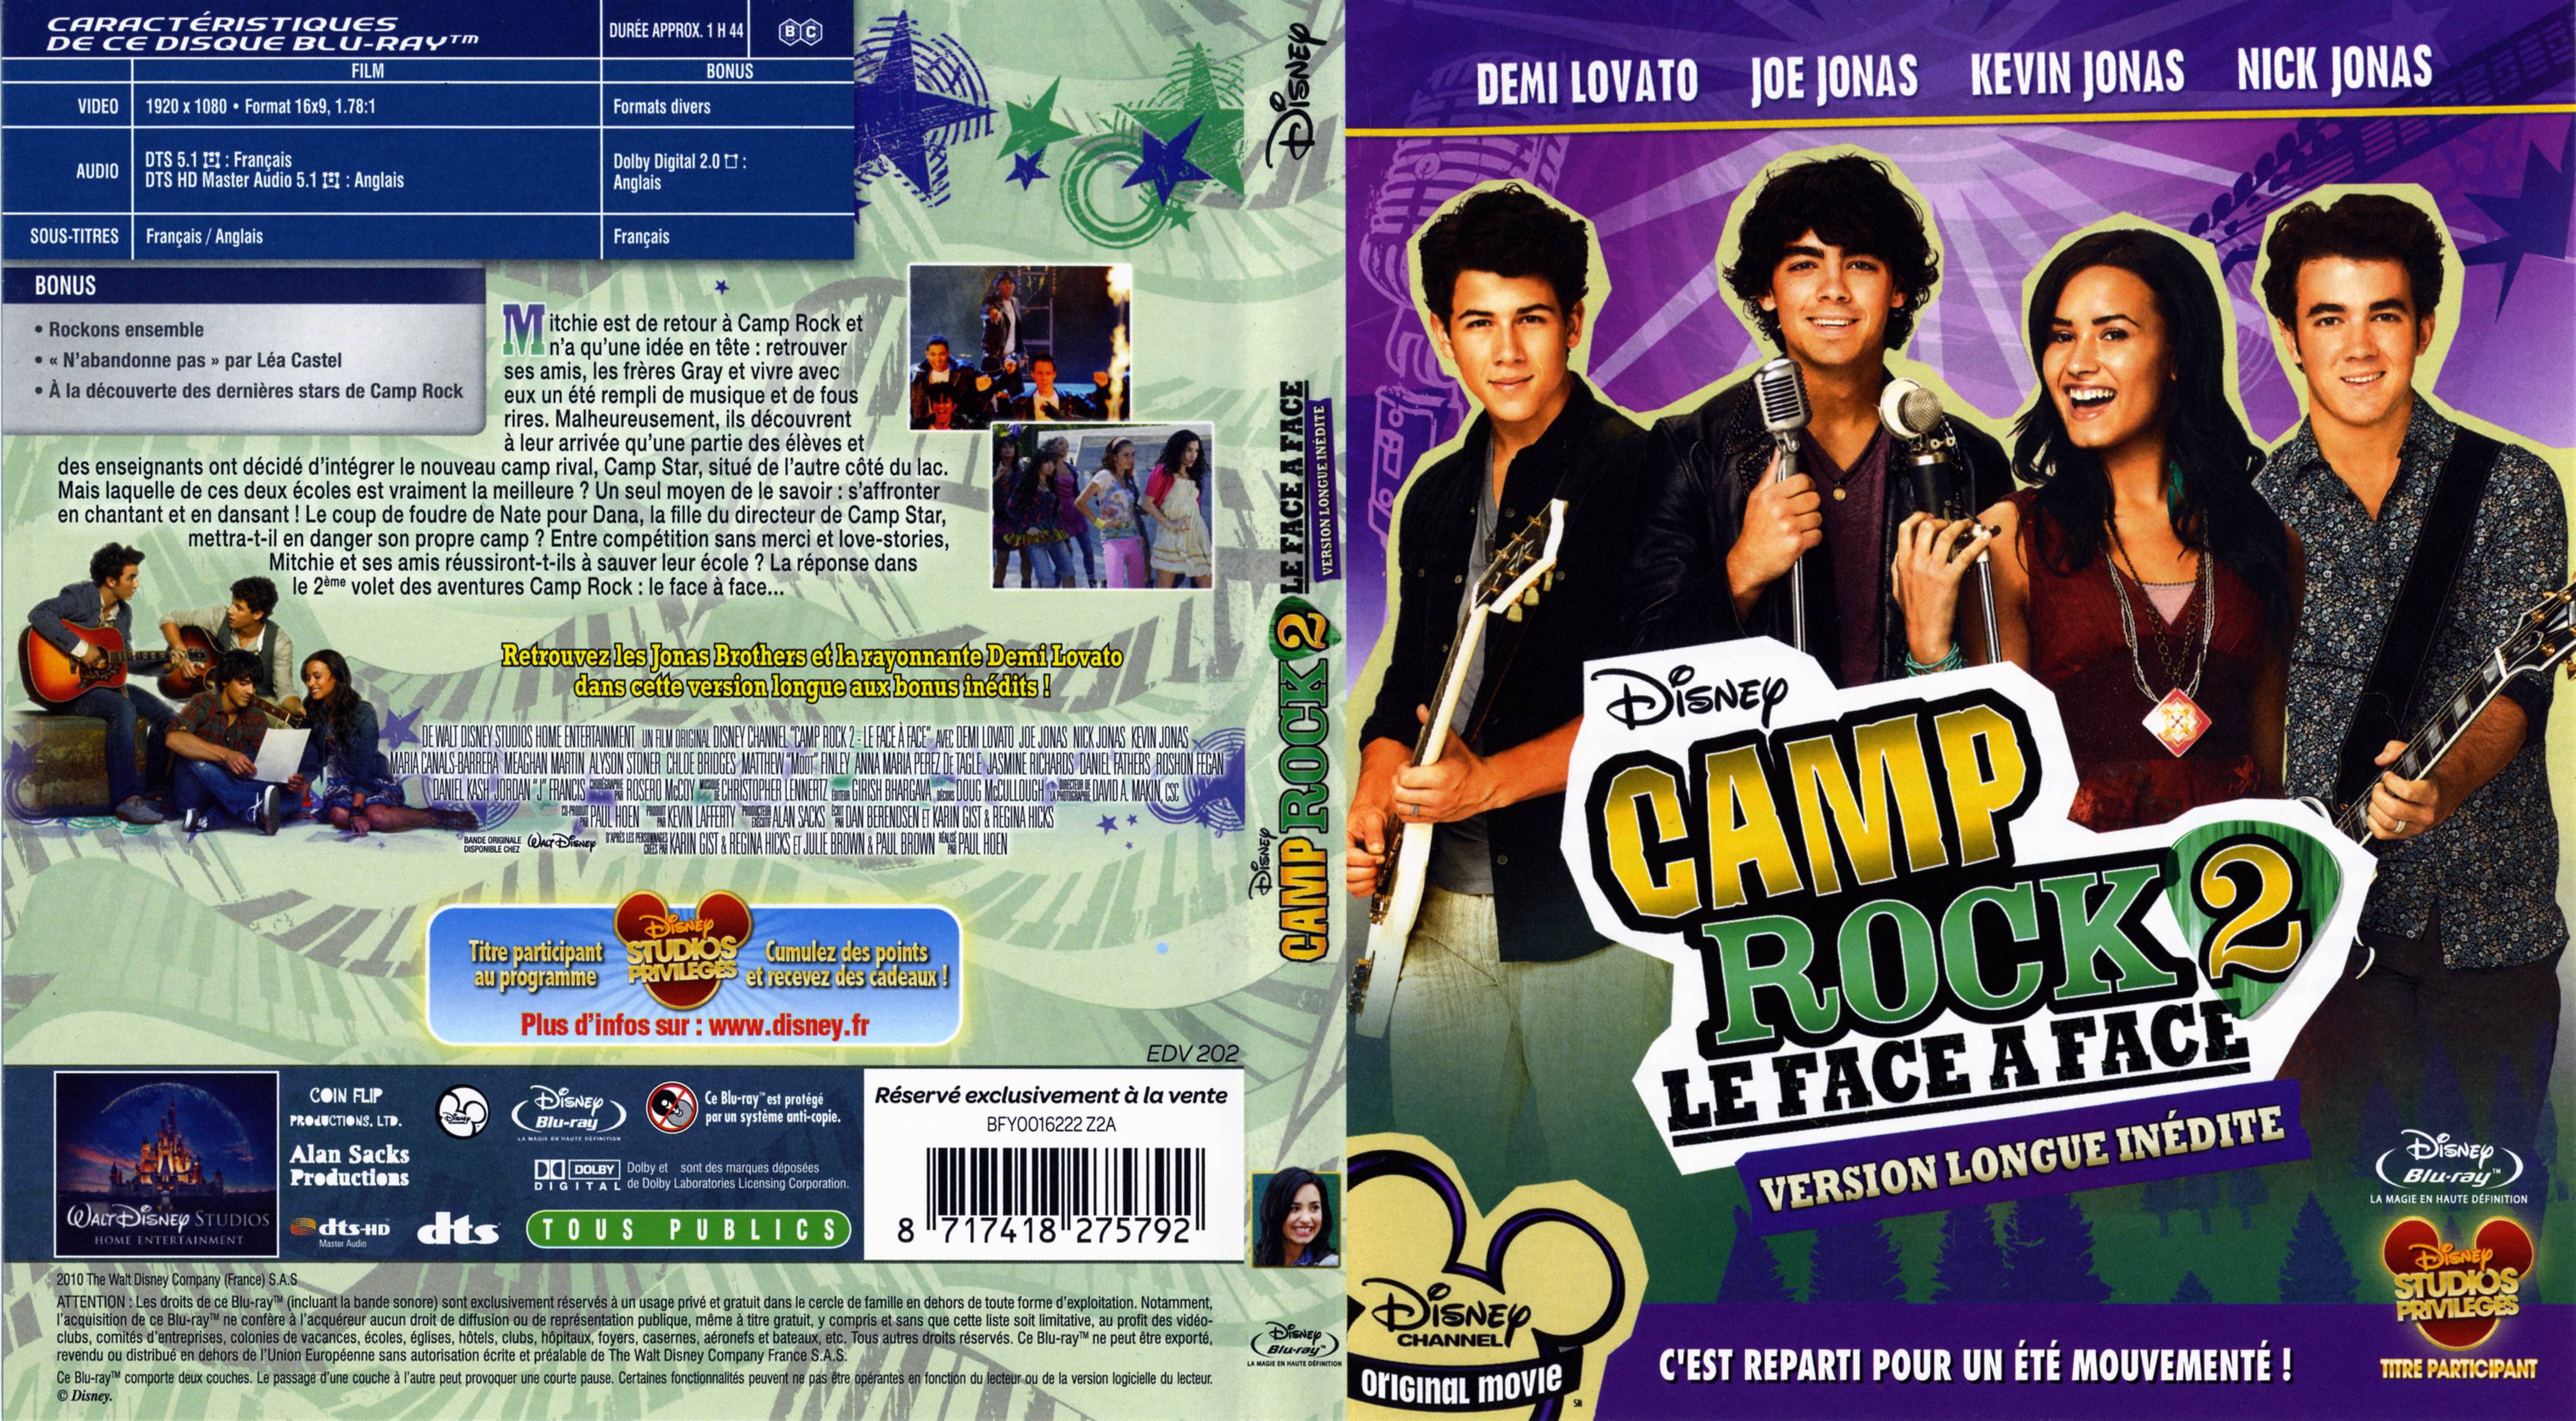 Jaquette DVD Camp Rock 2 (BLU-RAY)